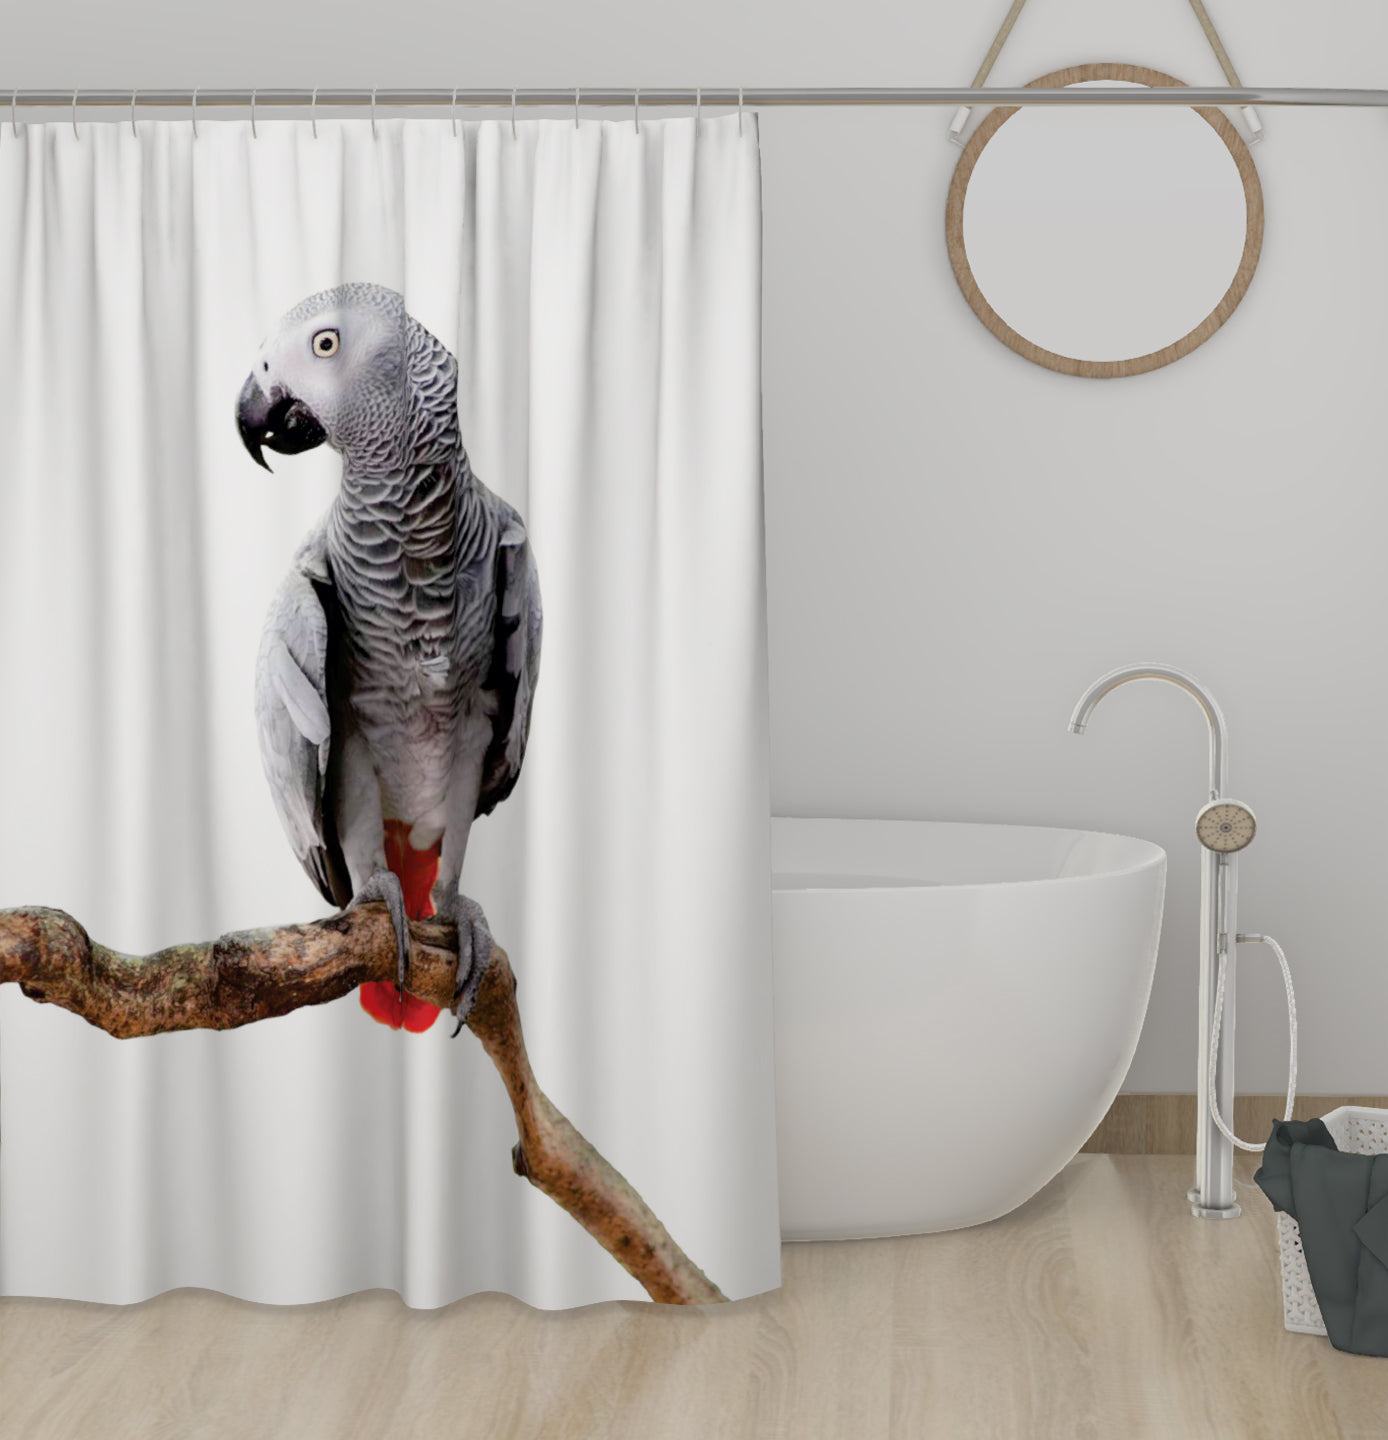 Lushomes shower curtain, Parrot Printed, Polyester waterproof 6x6.5 ft with hooks, non-PVC, Non-Plastic, For Washroom, Balcony for Rain, 12 eyelet & no Hooks (6 ft W x 6.5 Ft H, Pk of 1)